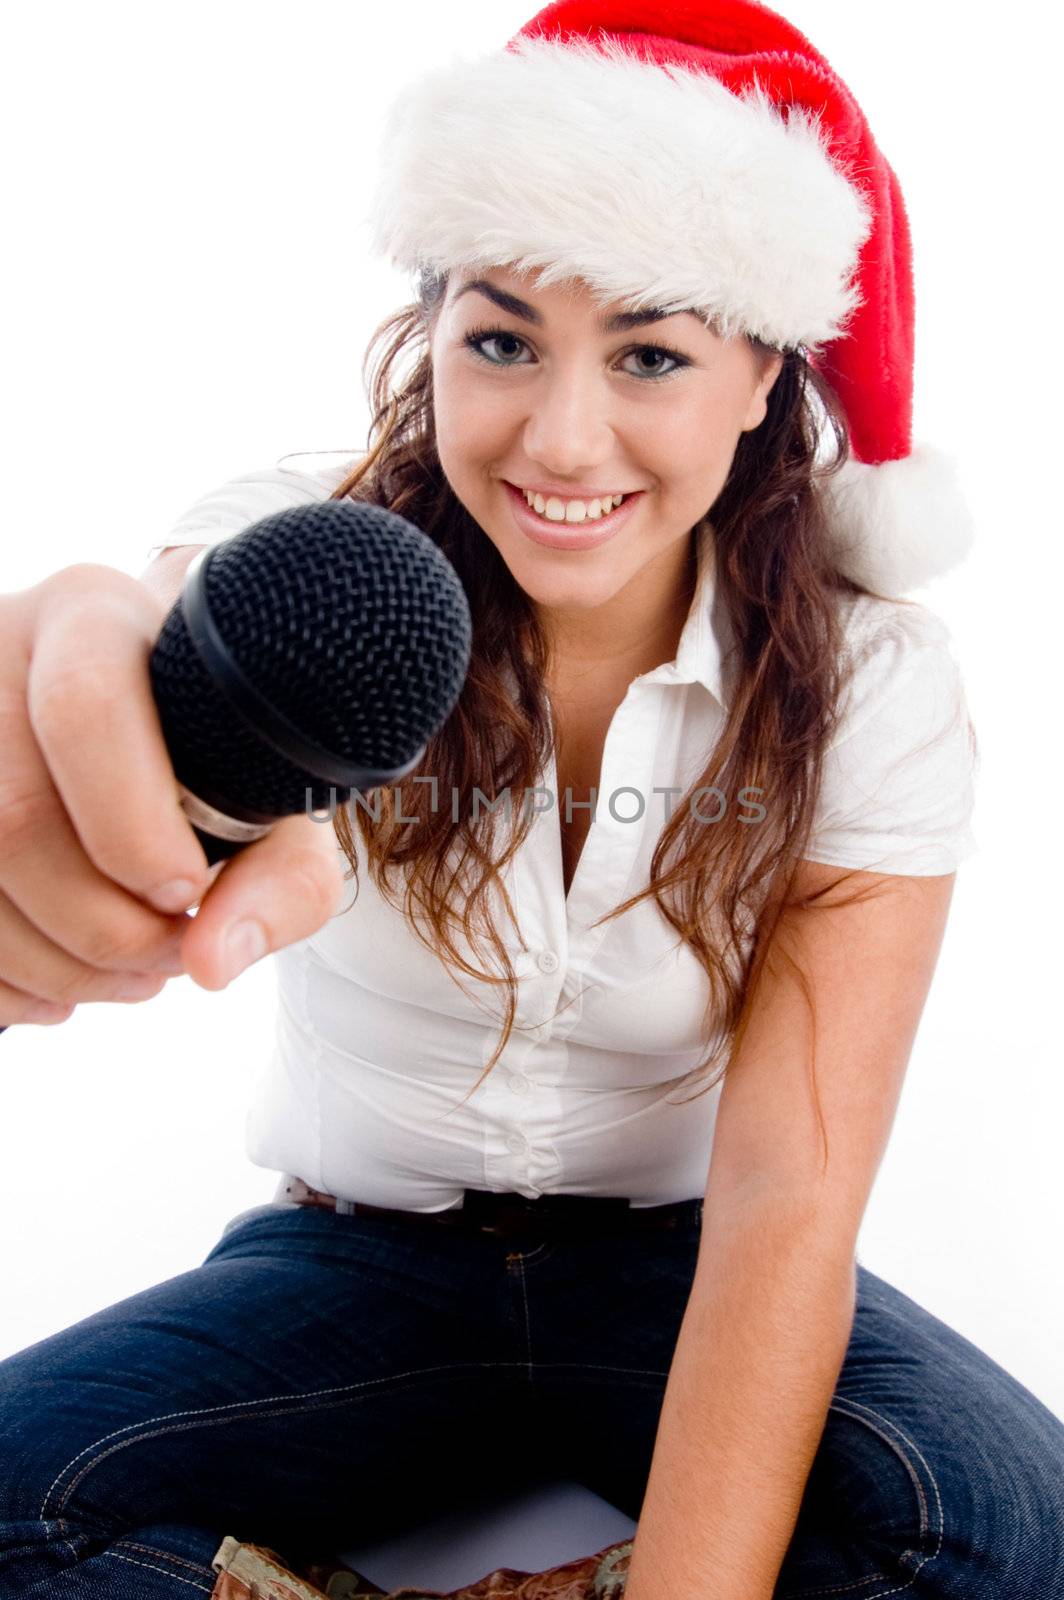 model wearing christmas hat and showing microphone on an isolated white background